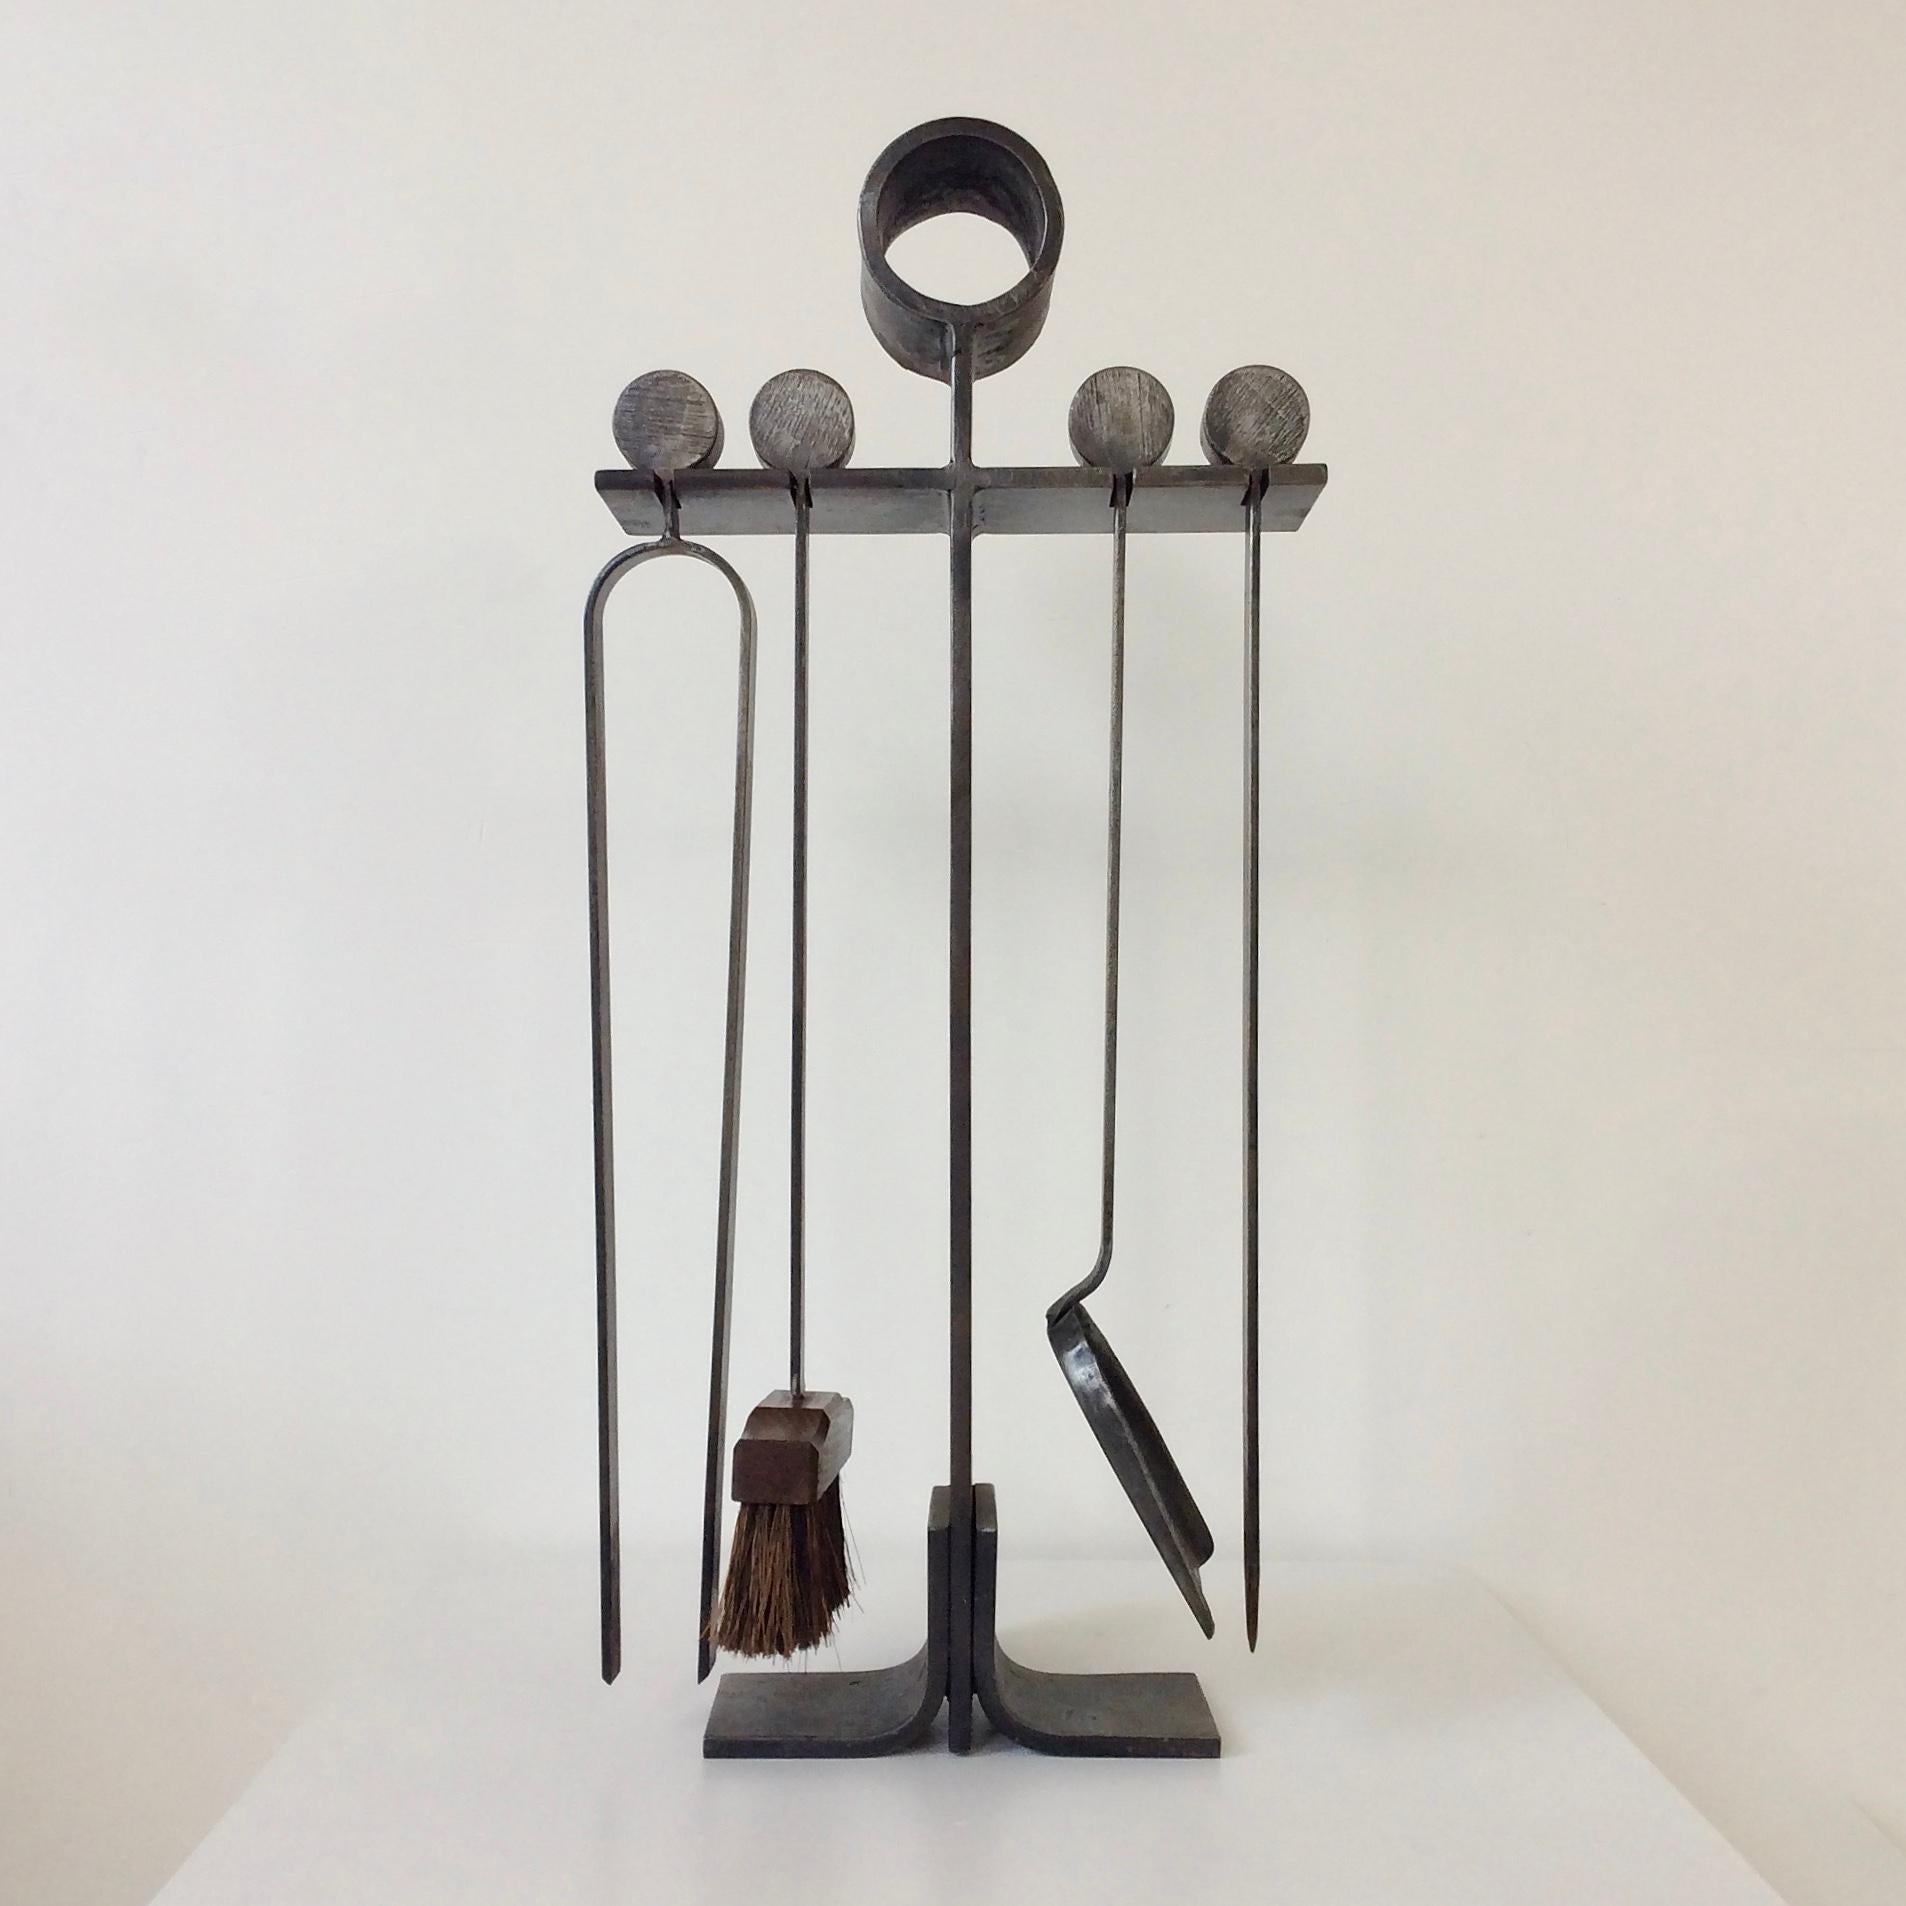 Mid-20th Century Midcentury French Wrought Iron Fireplace Tools, circa 1960